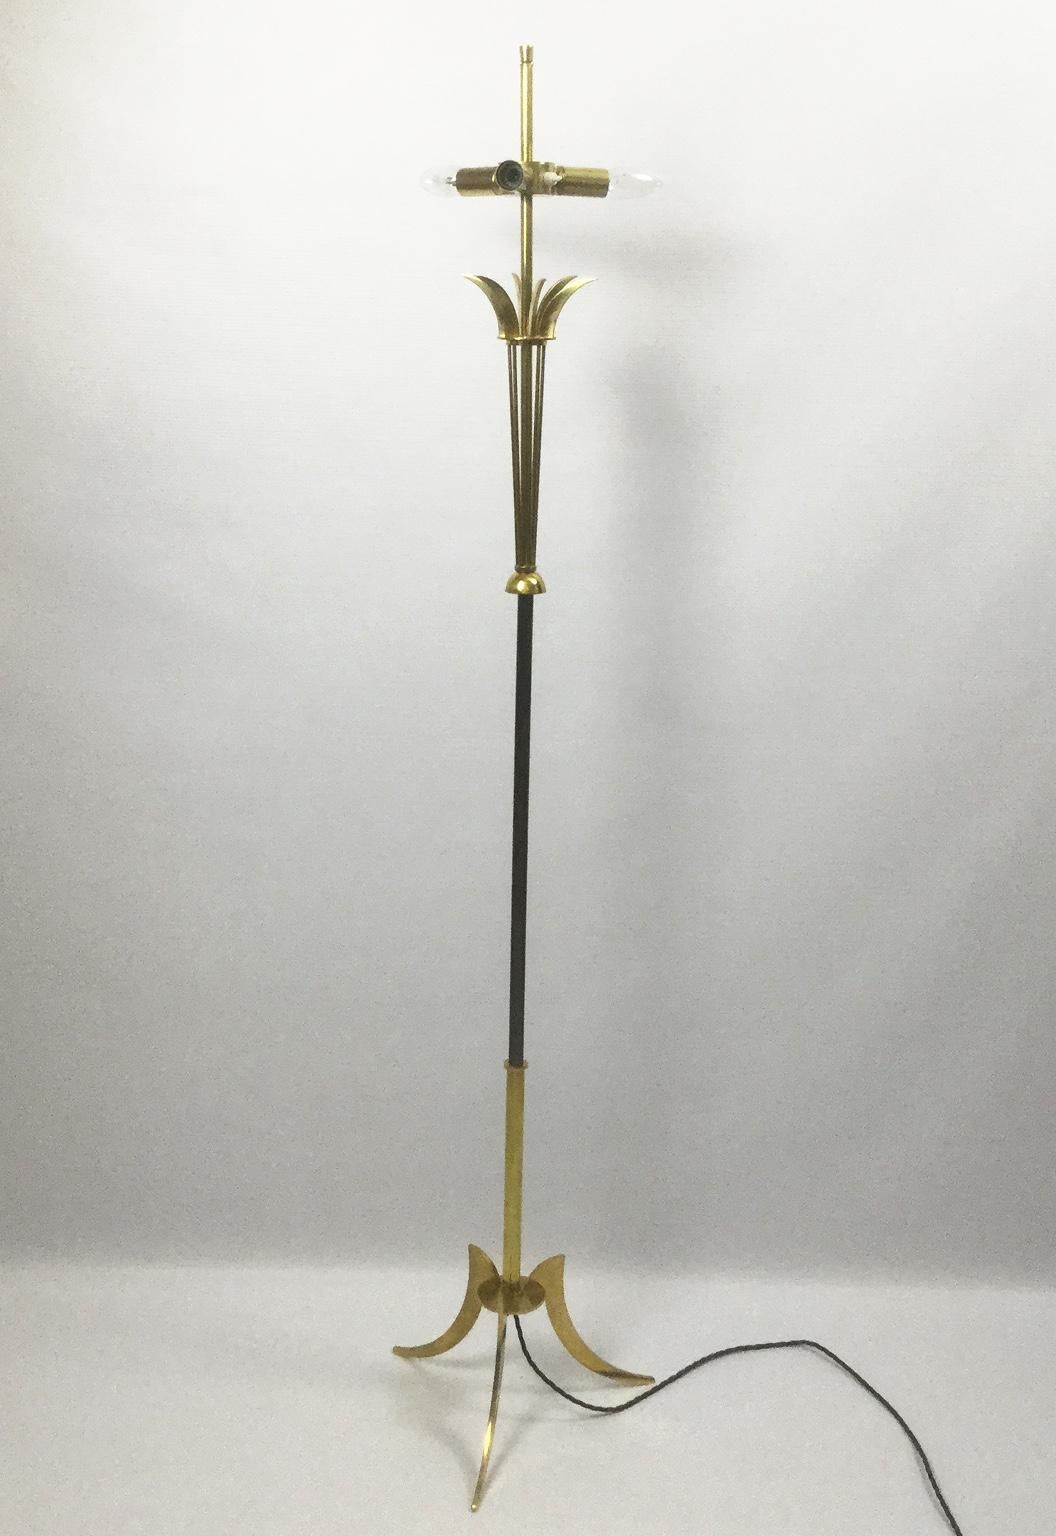 French Brass Floor Lamp Attributed to Maison Jansen, 1950s (Messing)